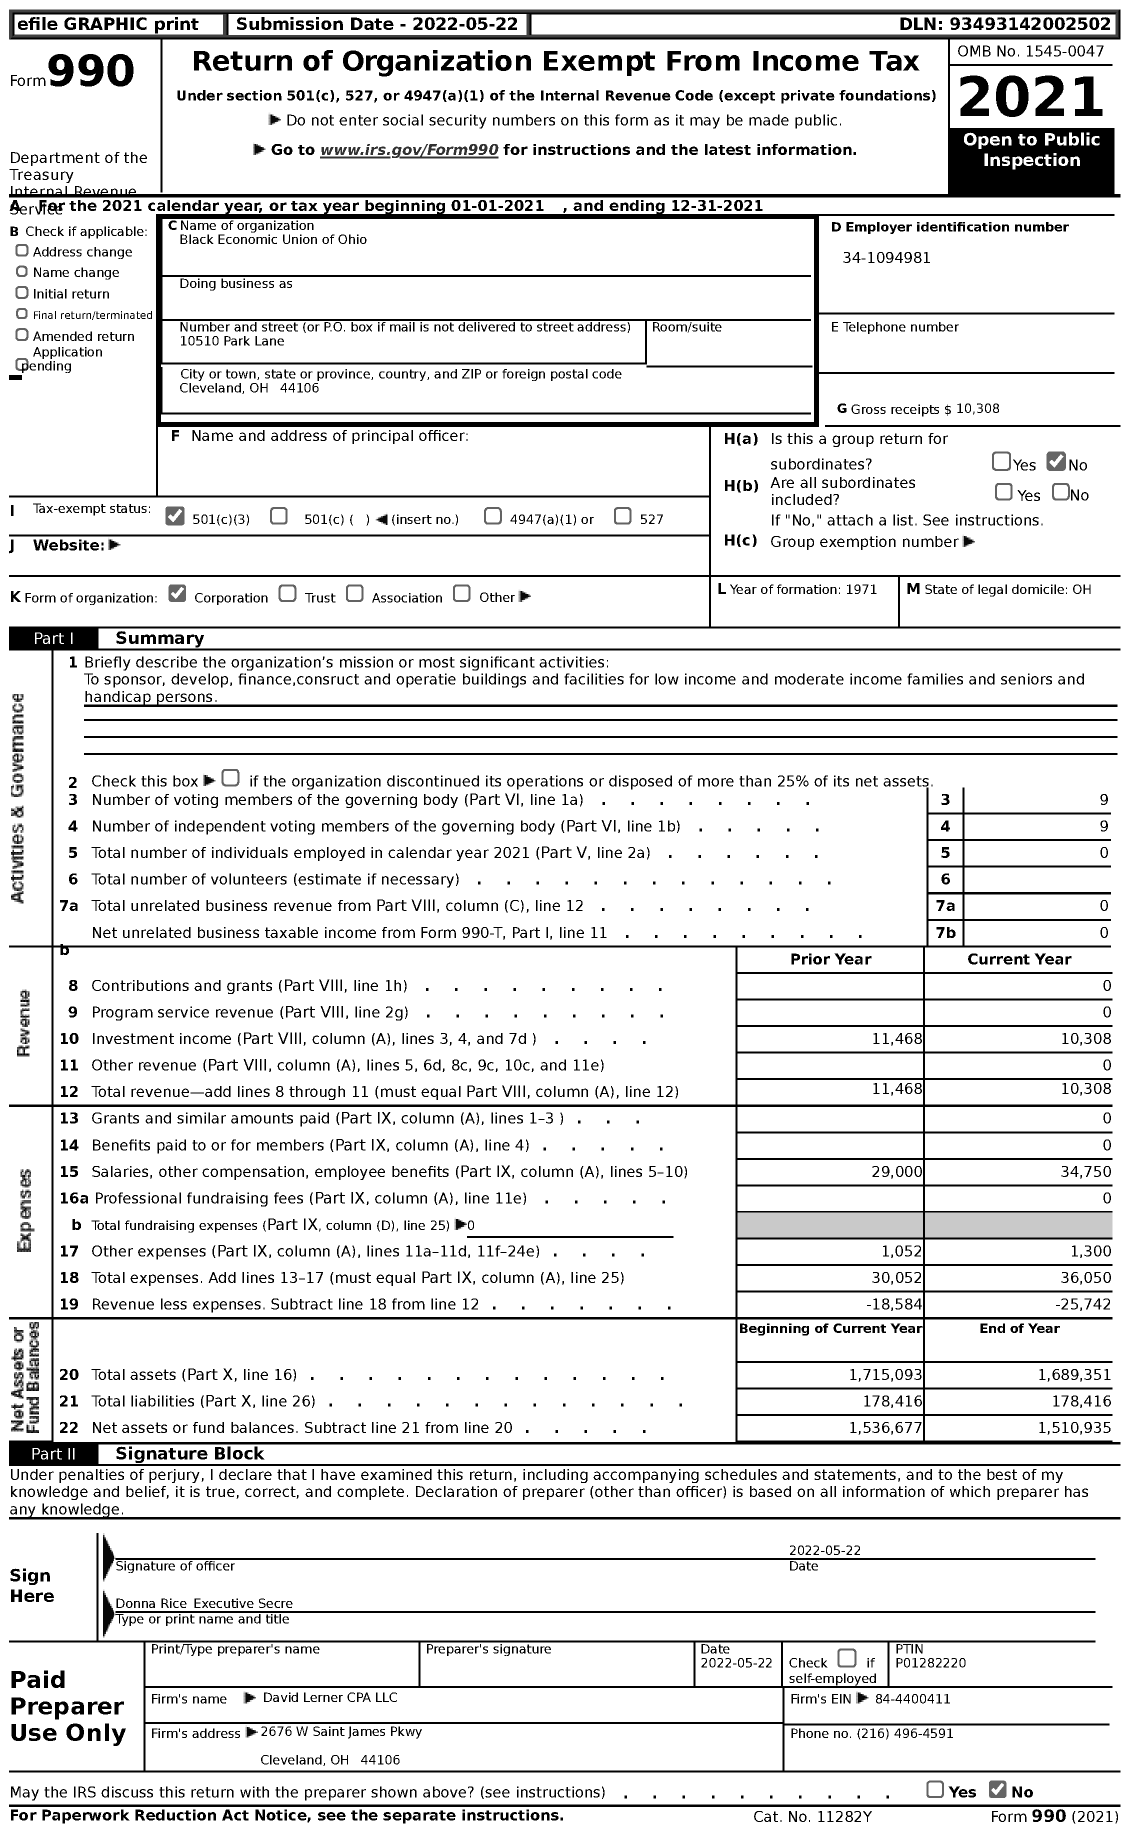 Image of first page of 2021 Form 990 for Black Economic Union of Ohio